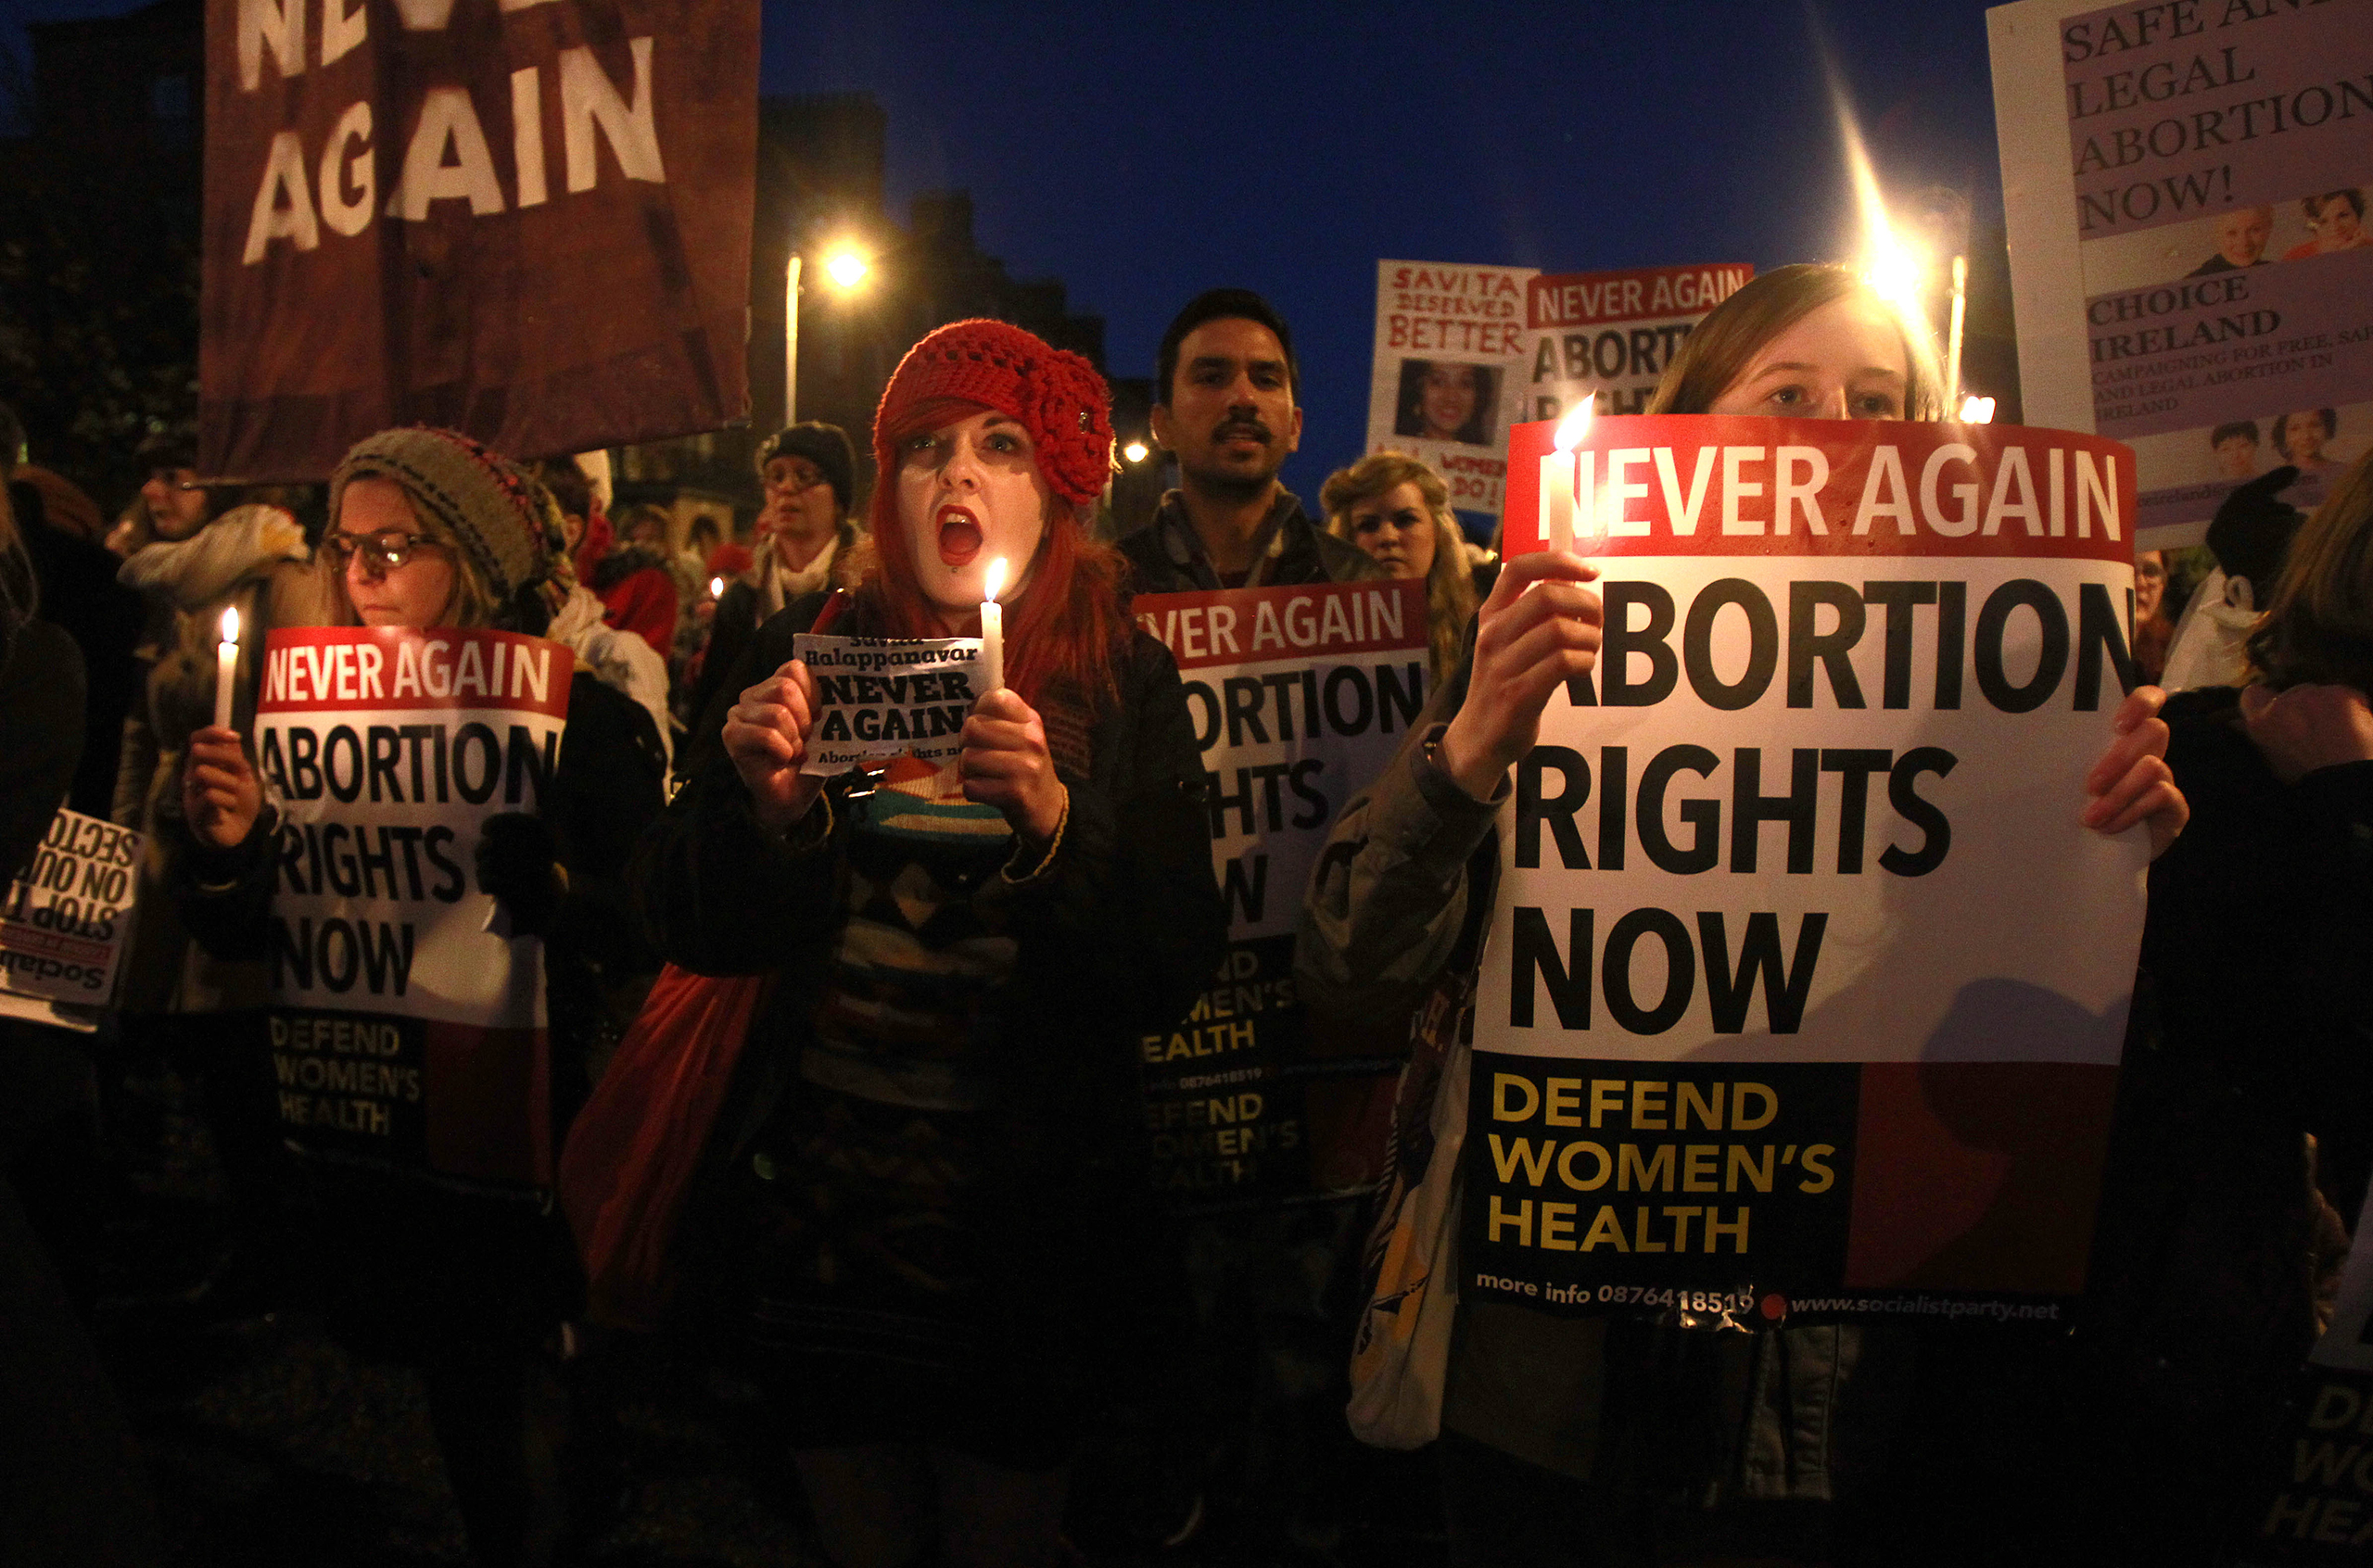 Demonstrators hold placards and candles in memory of Savita Halappanavar, whose doctors allegedly refused to perform an abortion because it was against the laws of the Catholic country, in Dublin on Nov. 17, 2012. The Indian woman, who was 17 weeks pregnant, repeatedly asked the hospital to terminate her pregnancy because she had severe back pain and was miscarrying, her family said. (Peter Muhly—AFP/Getty Images)